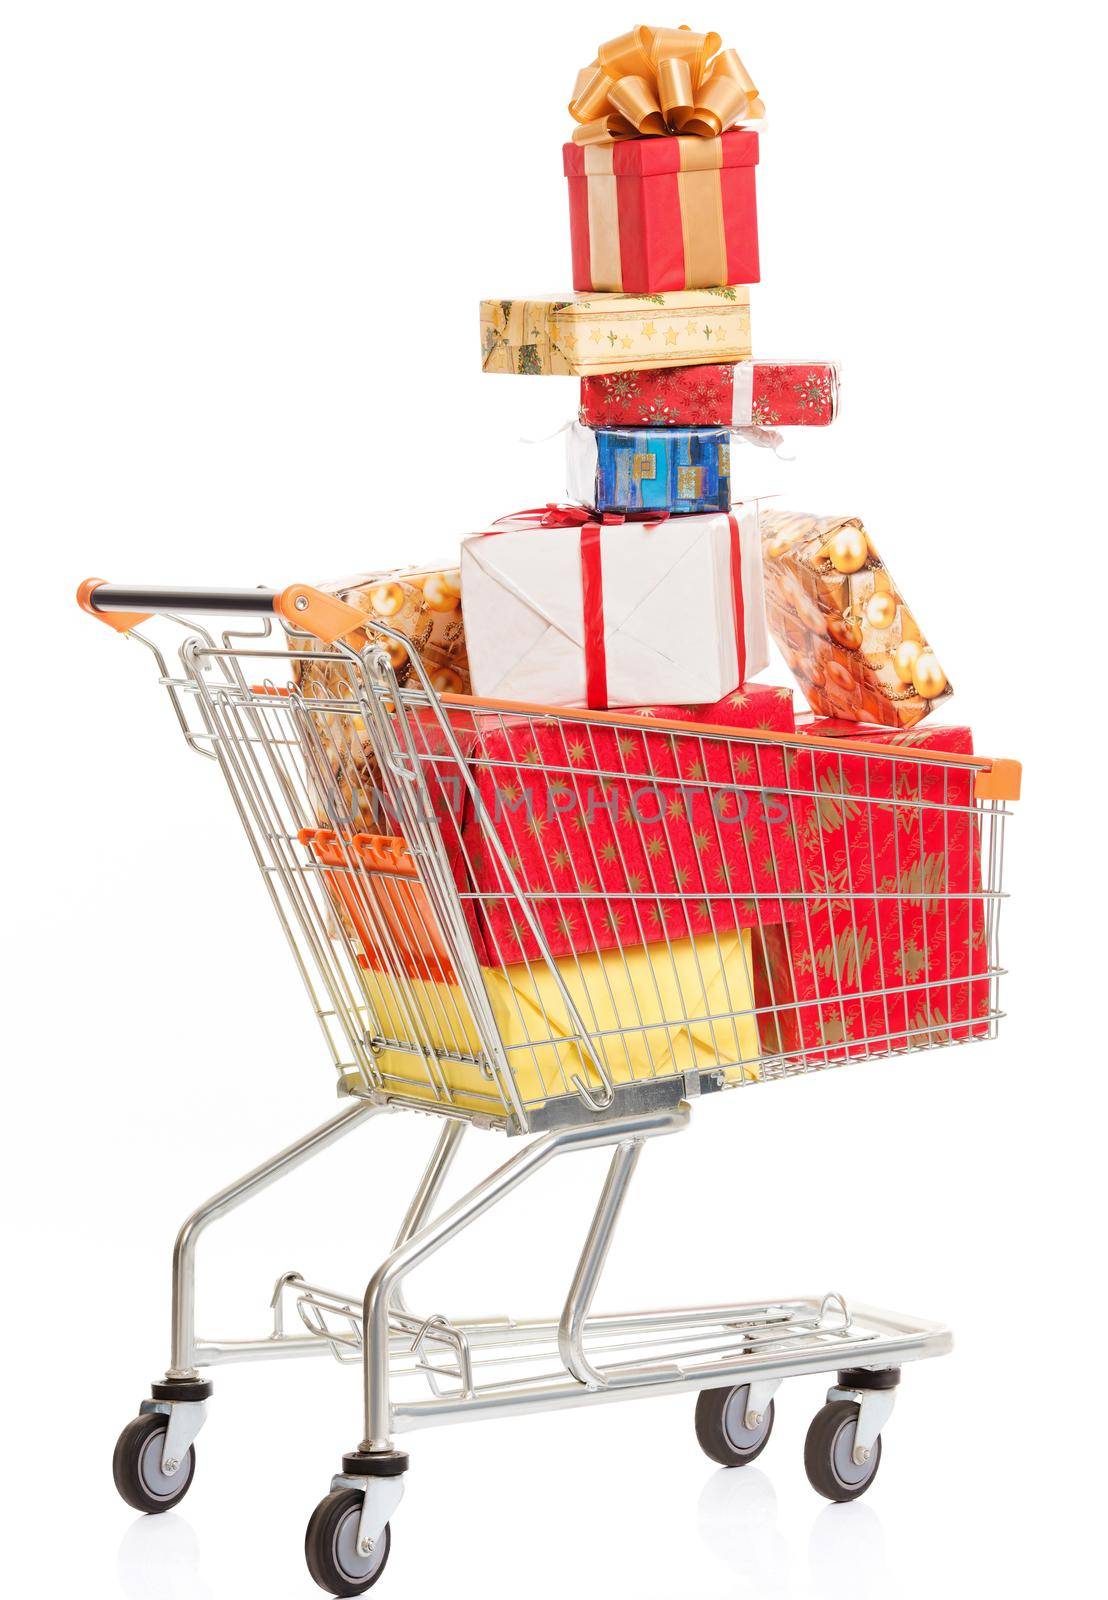 Pyramid of Christmas Gifts, Multicolored Boxes Fill a Shopping Cart on a White Background. Christmas Shopping Season. Close-up. High quality photo